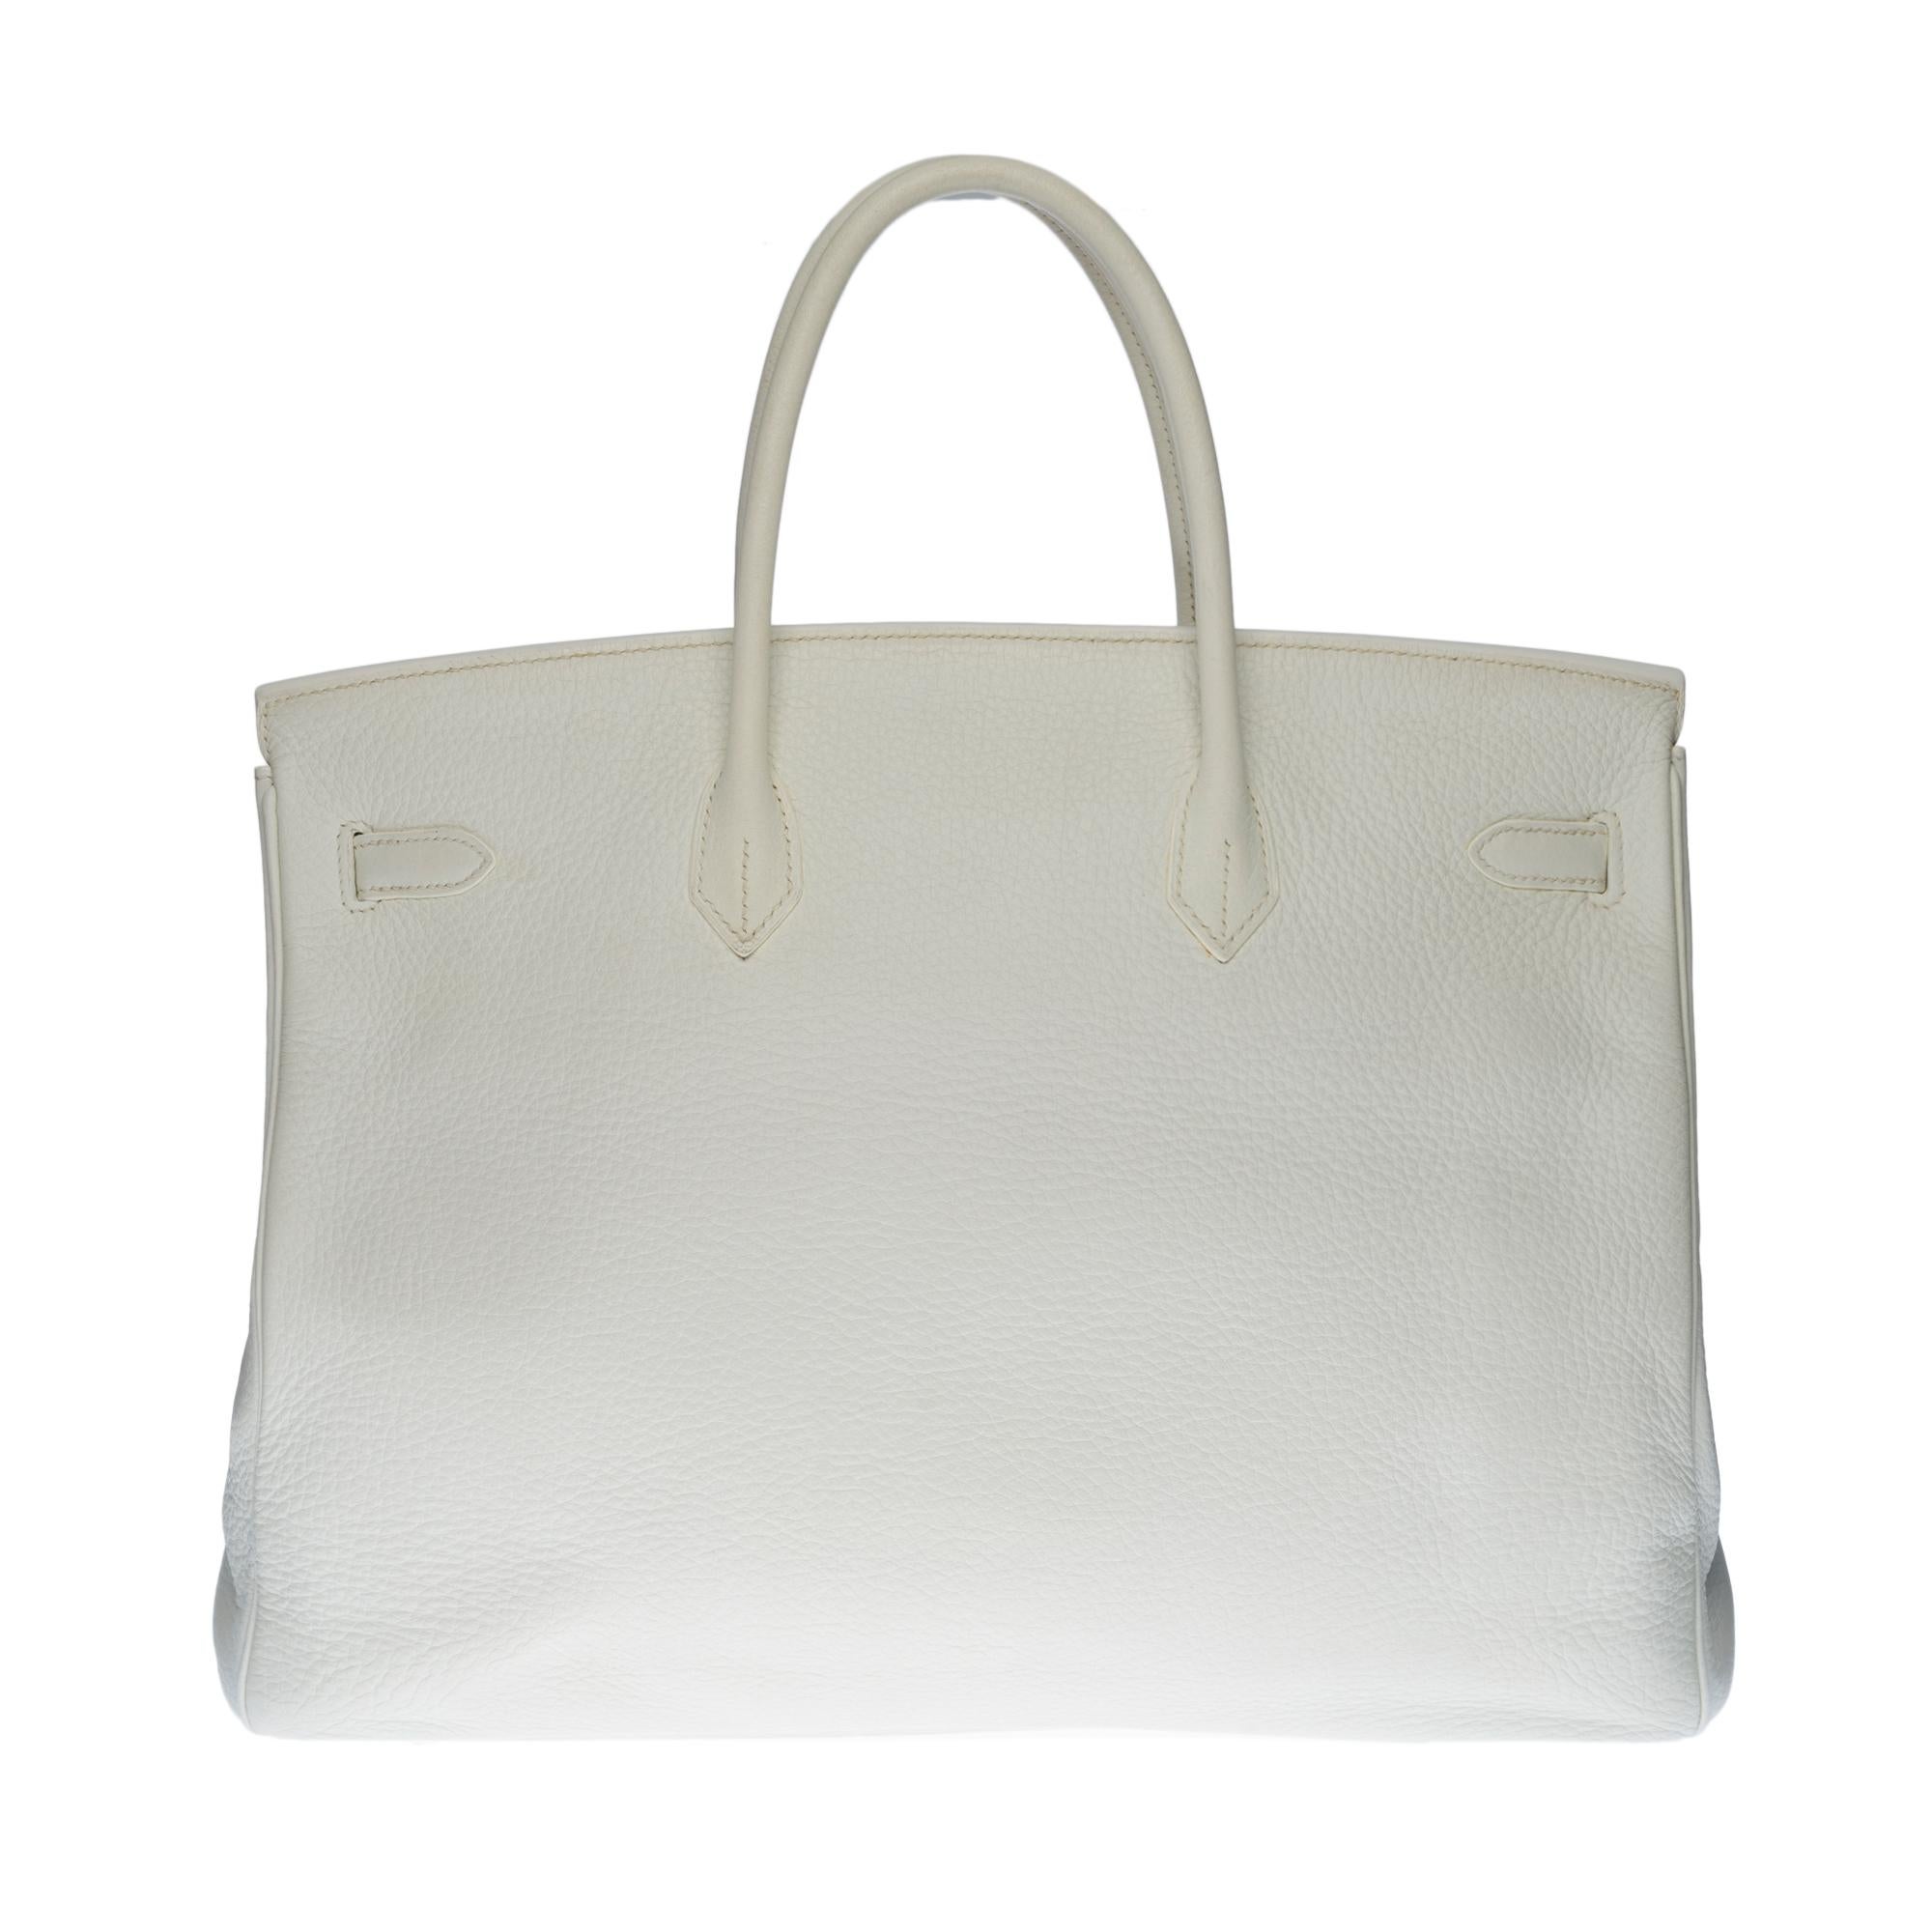 Beautiful Hermes Birkin 40 cm handbag in white Togo leather, palladium silver metal hardware, double handle leather bench allowing a handheld

Flap closure
Lining in white leather, one zip pocket, one patch pocket
Signature: 